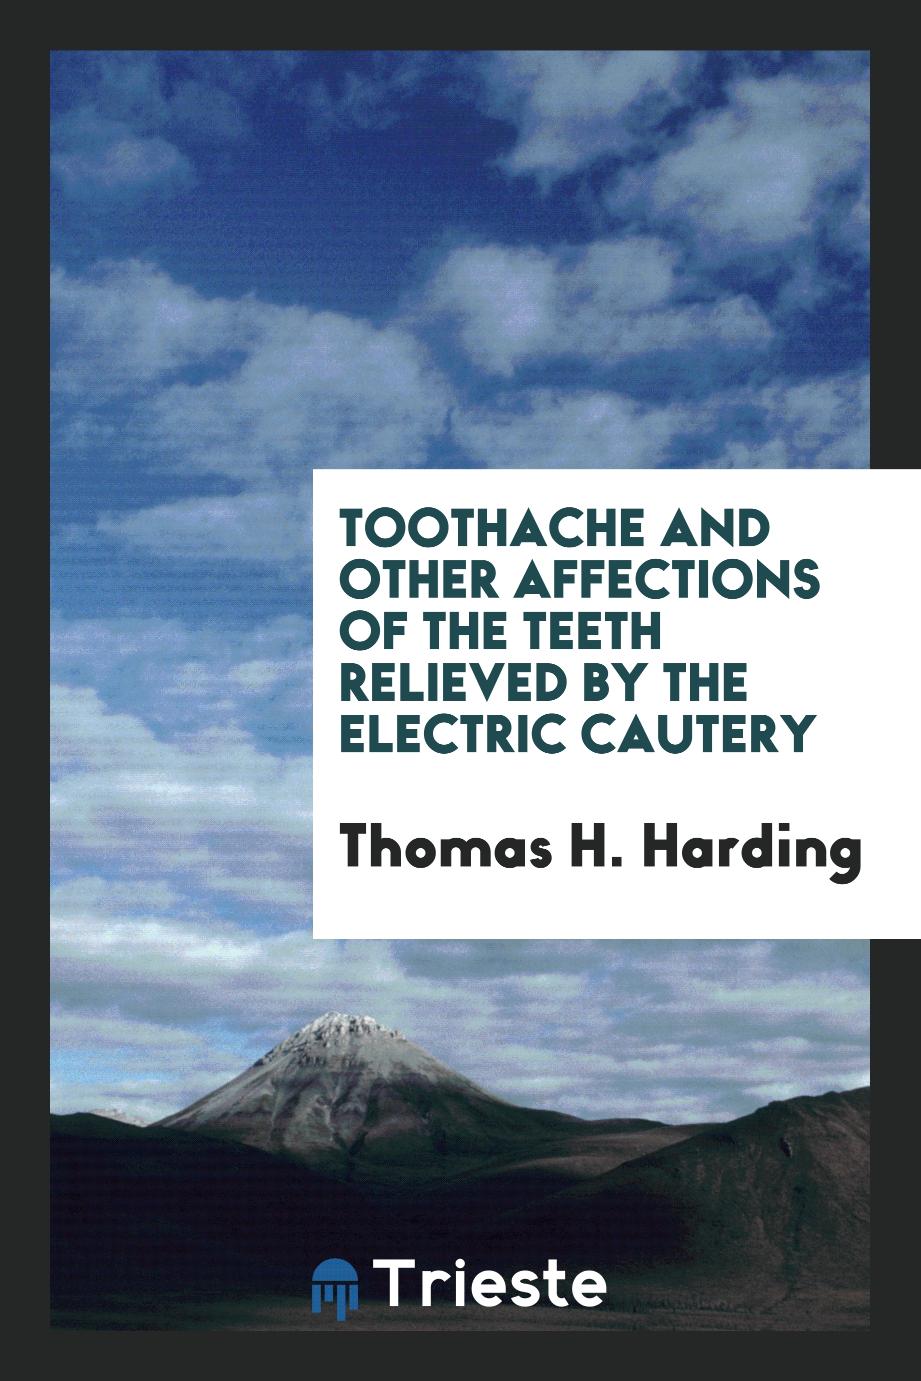 Toothache and other affections of the teeth relieved by the electric cautery